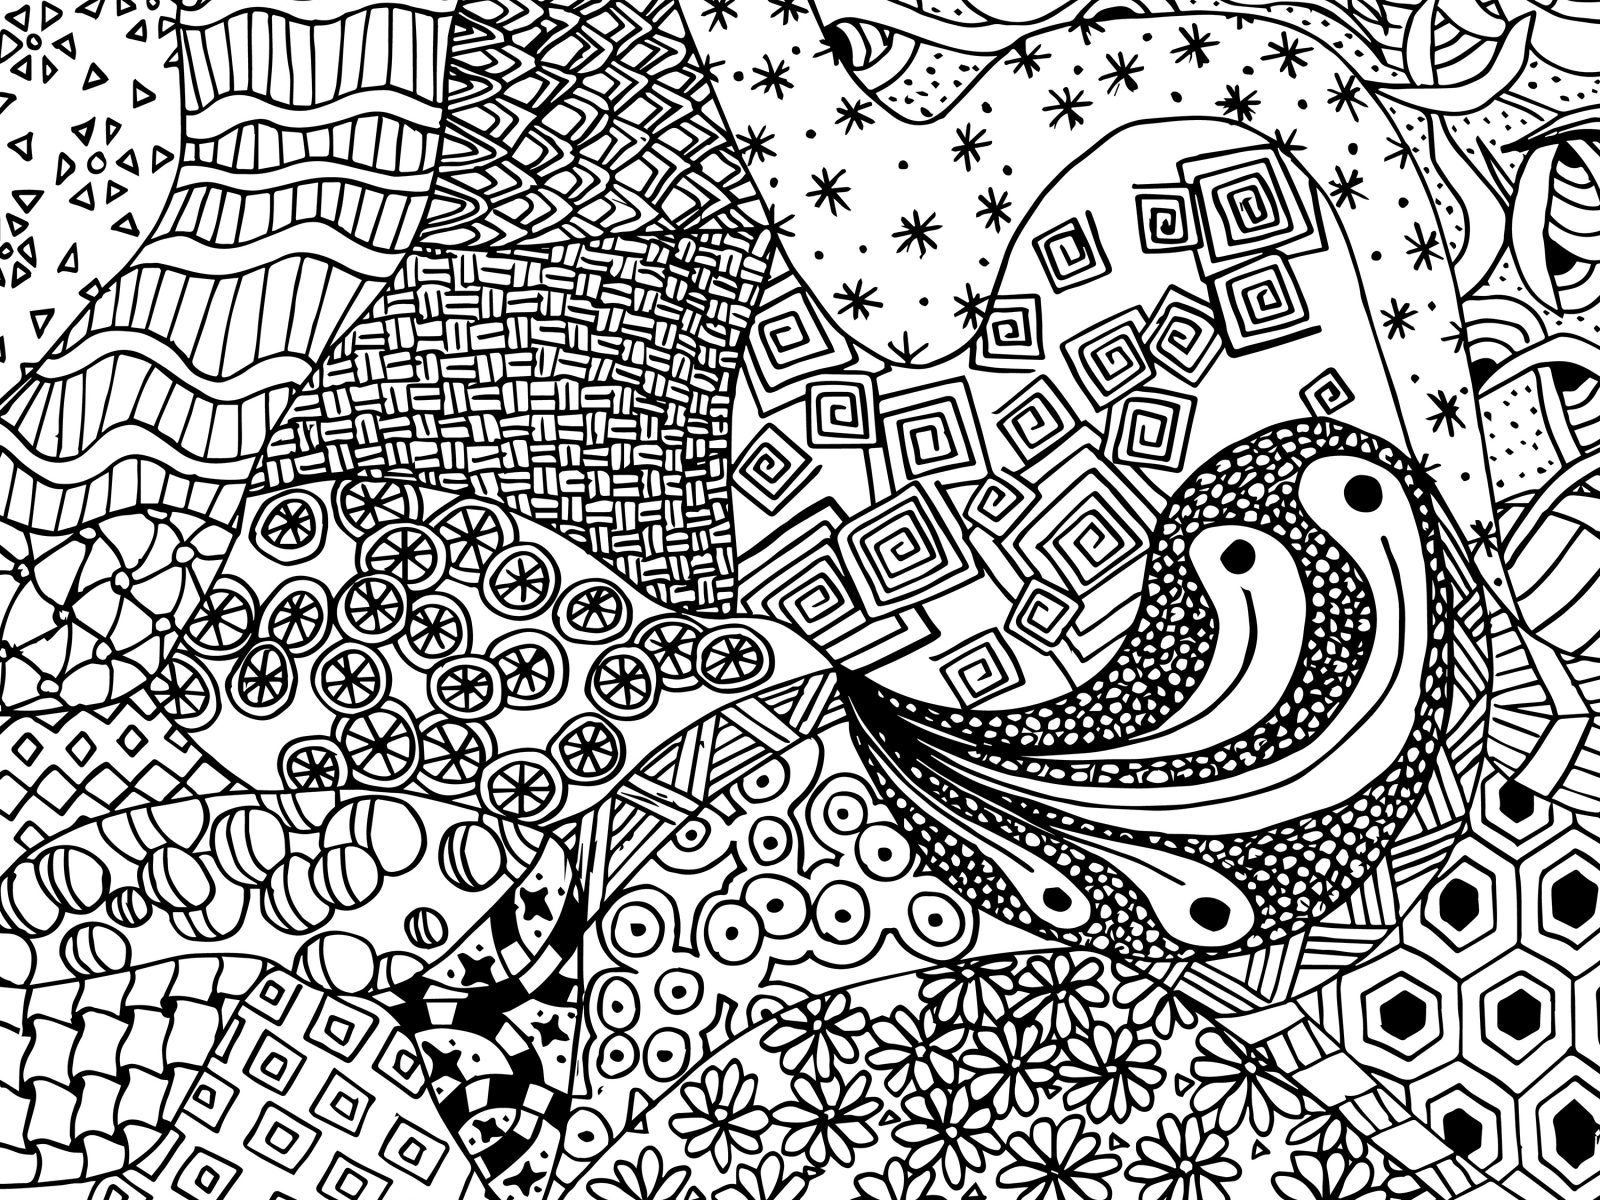 Zen Coloring Pages Printable at GetColorings.com | Free printable